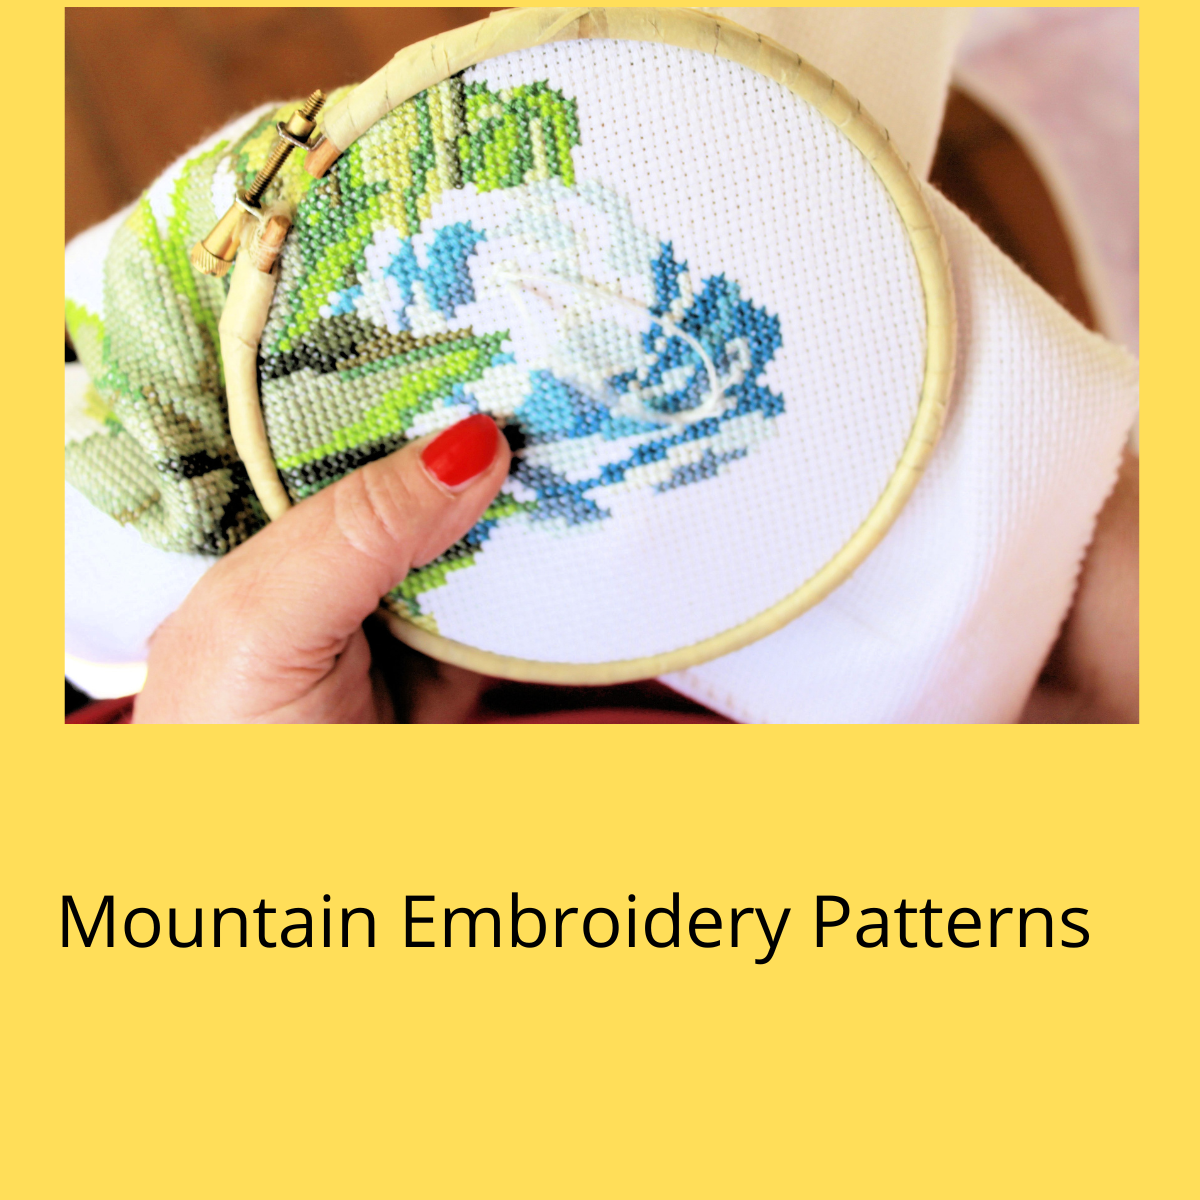 Easy patterns to embroider mountains